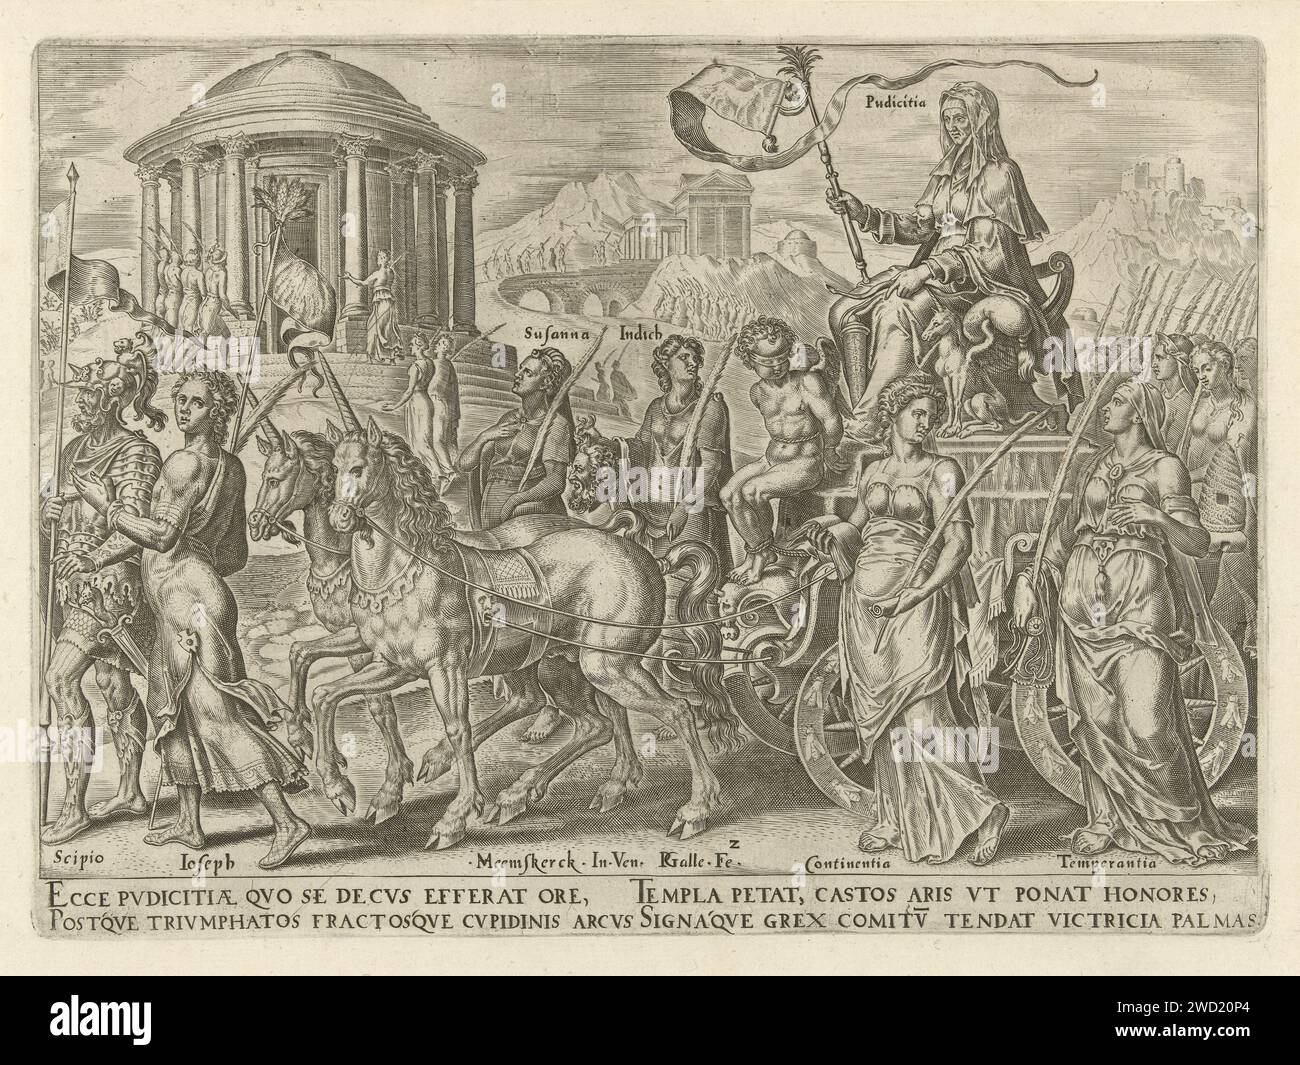 Triumph of the chastity, Philips Galle, After Maarten van Heemskerck, c. 1565 print The car of chastity (Pudicitia), a veiled woman, is drawn by unicorns, legendary chaste animals. Cupido is blindfolded and tied to her feet. In the procession, chaste figures from history, the Bible and classical mythology, for example the Roman general Scipio, Joseph, Suzanna and the honorable Judit, with the head of Holofernes in her hand. The virtues of self -control (continentia) and moderation (temperantia) are also present in the procession. The car drives towards the temple of chastity. The print has a L Stock Photo